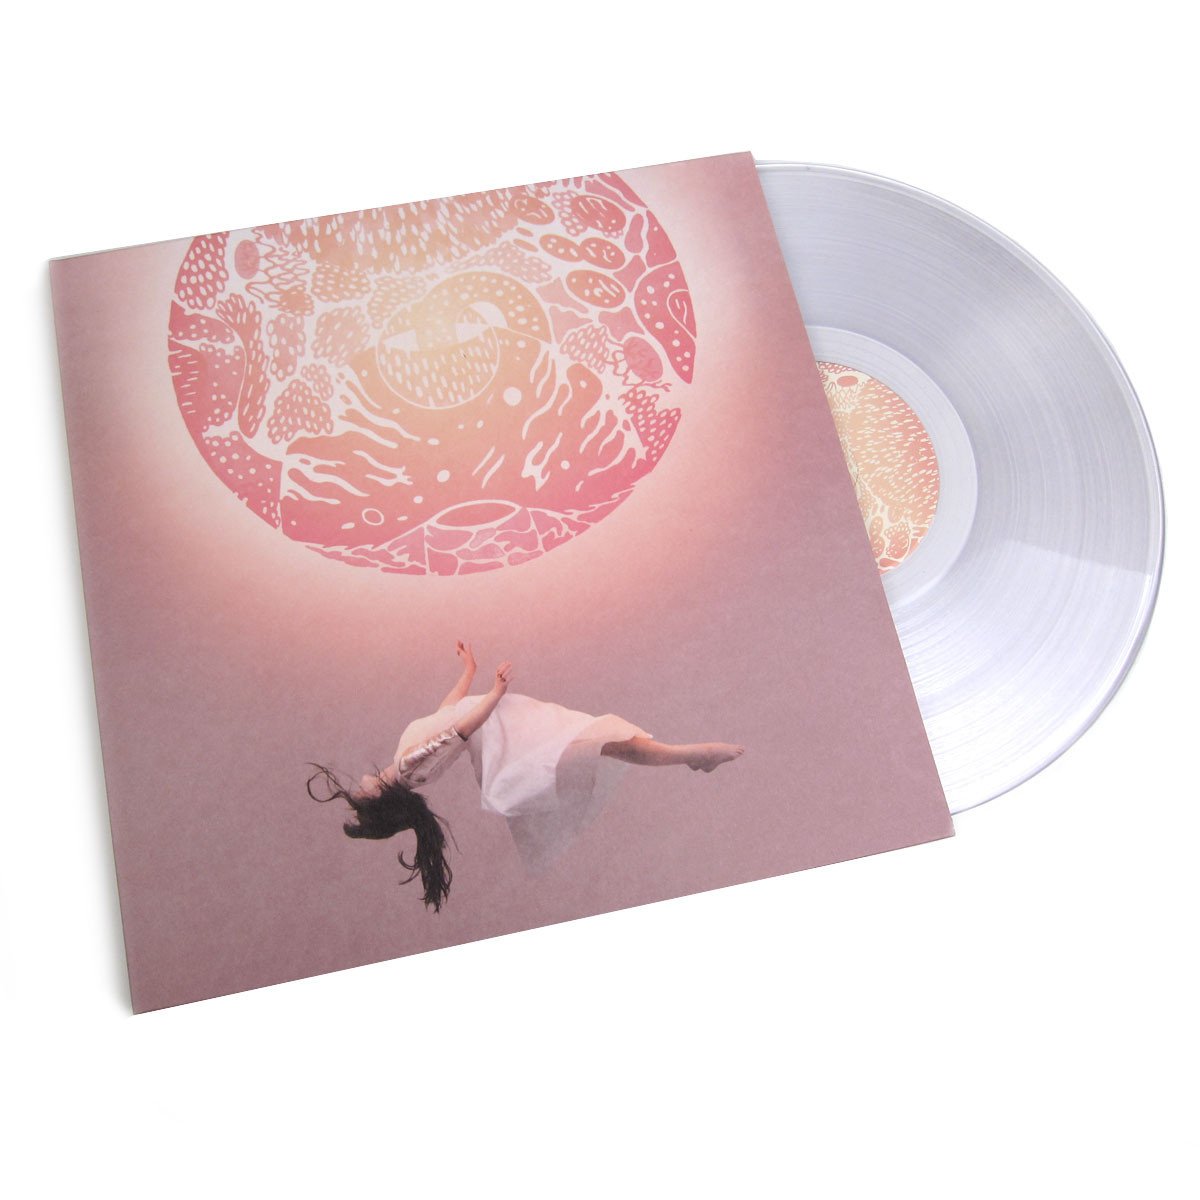 Purity Ring Another Eternity Album Download